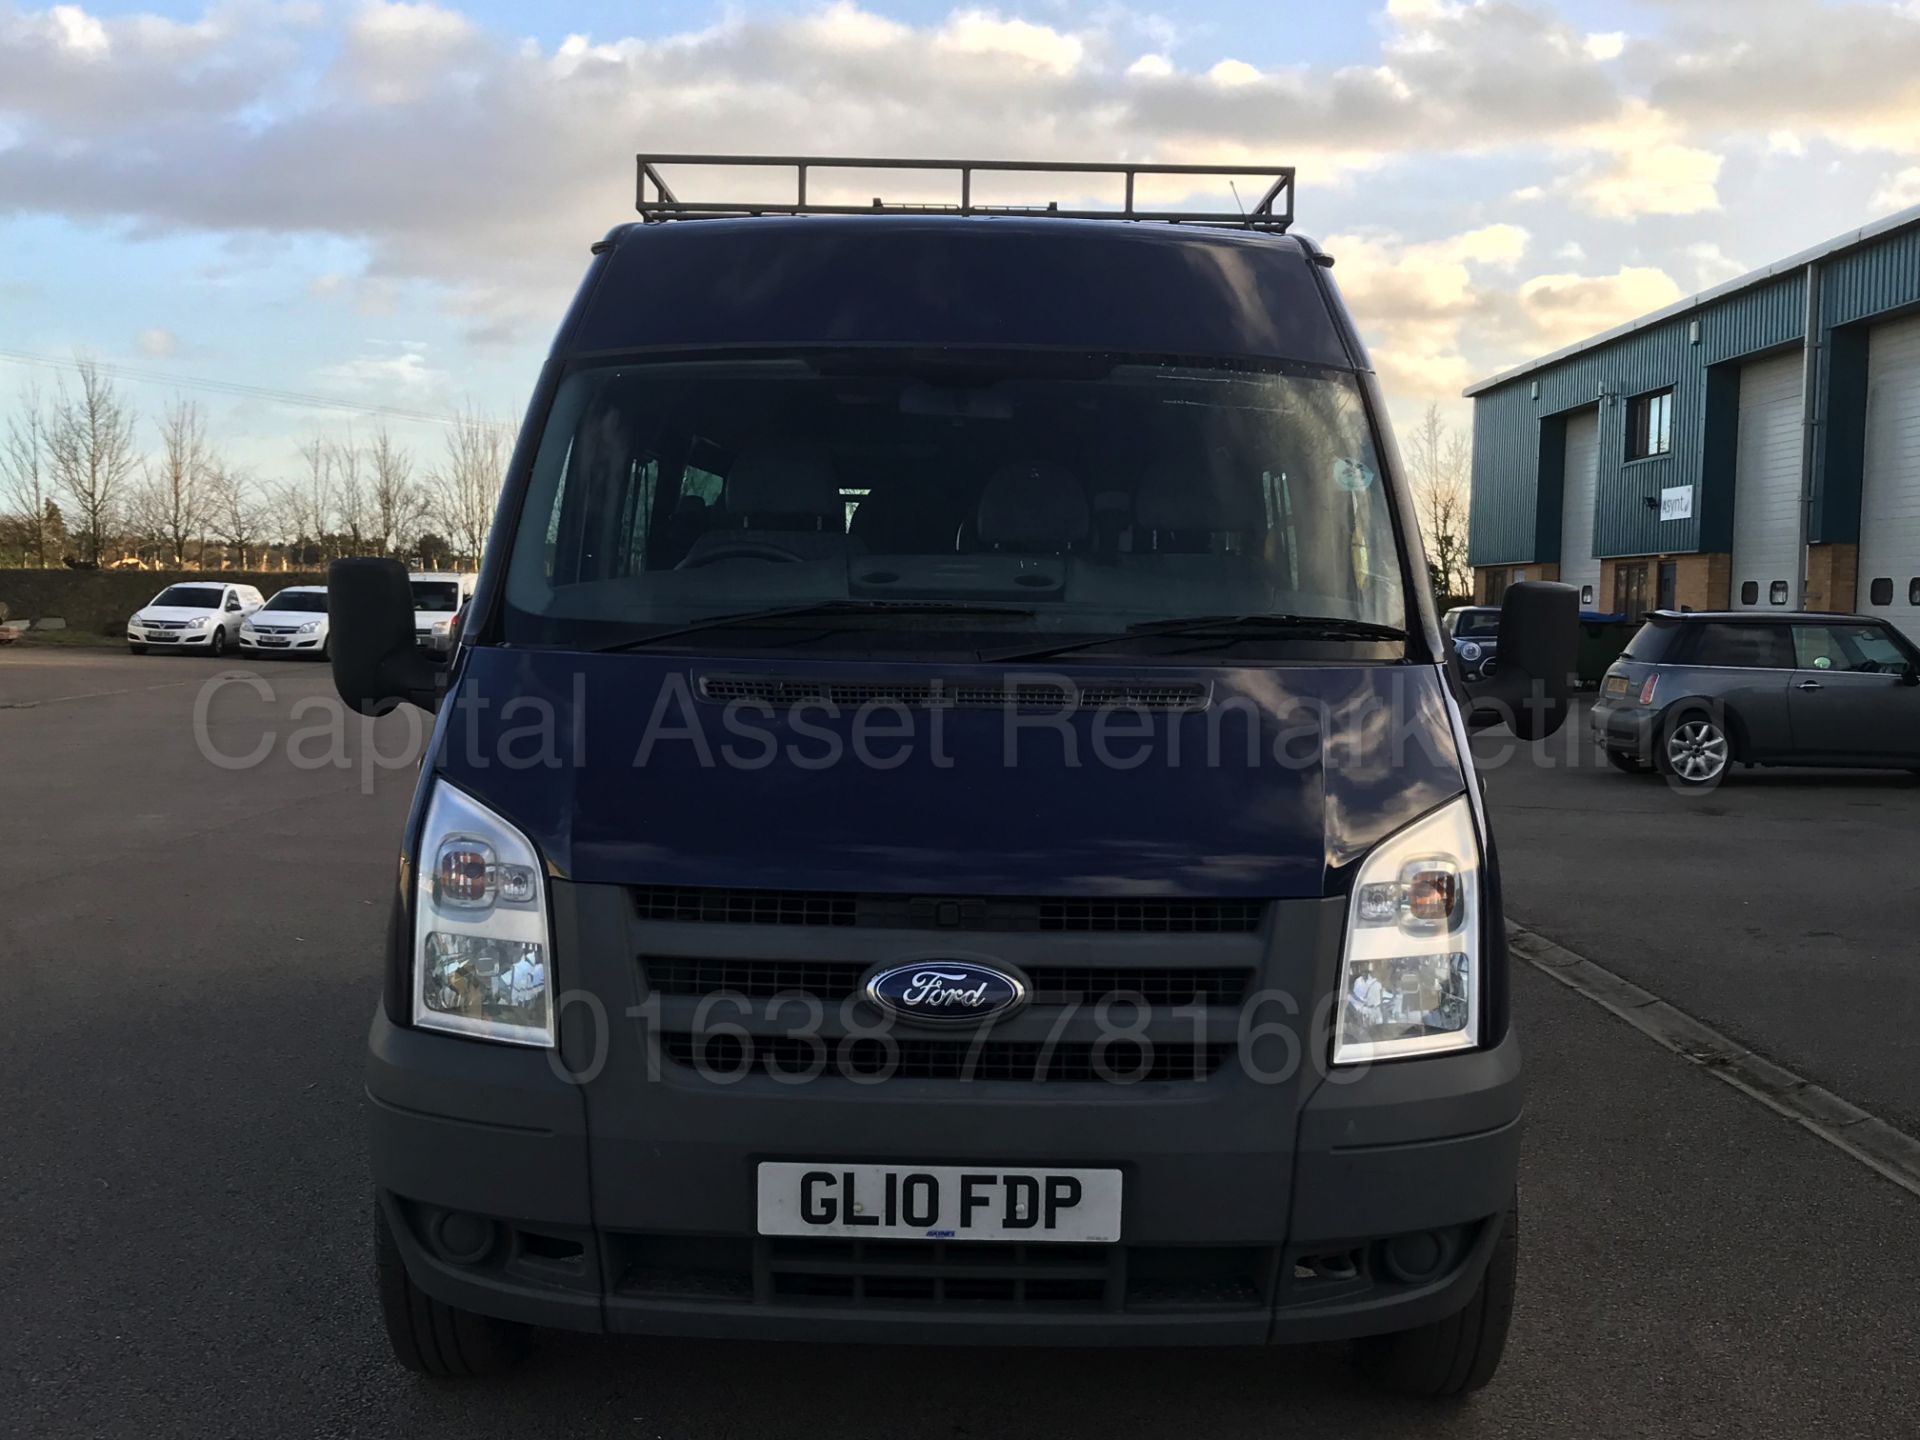 FORD TRANSIT 100 T350 '15 SEATER MINI-BUS' (2010 - 10 REG) '2.4 TDCI - 100 BHP - 5 SPEED' *AIR CON* - Image 3 of 28